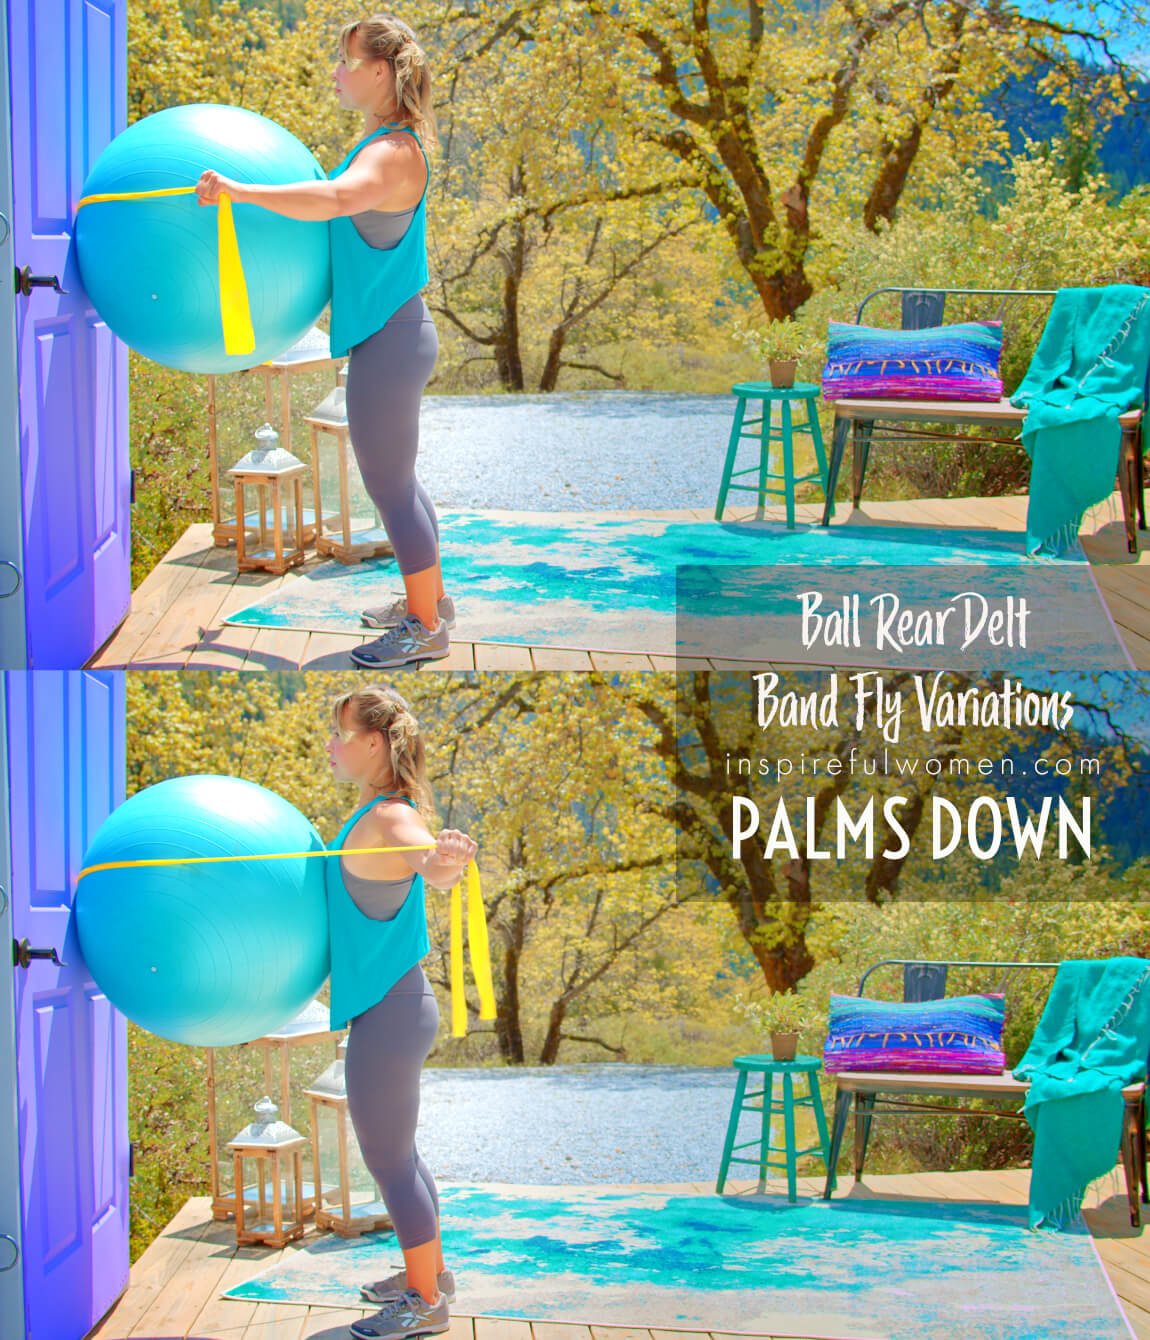 palms-down-rear-delt-banded-fly-ball-anchored-shoulder-exercise-at-home-variations